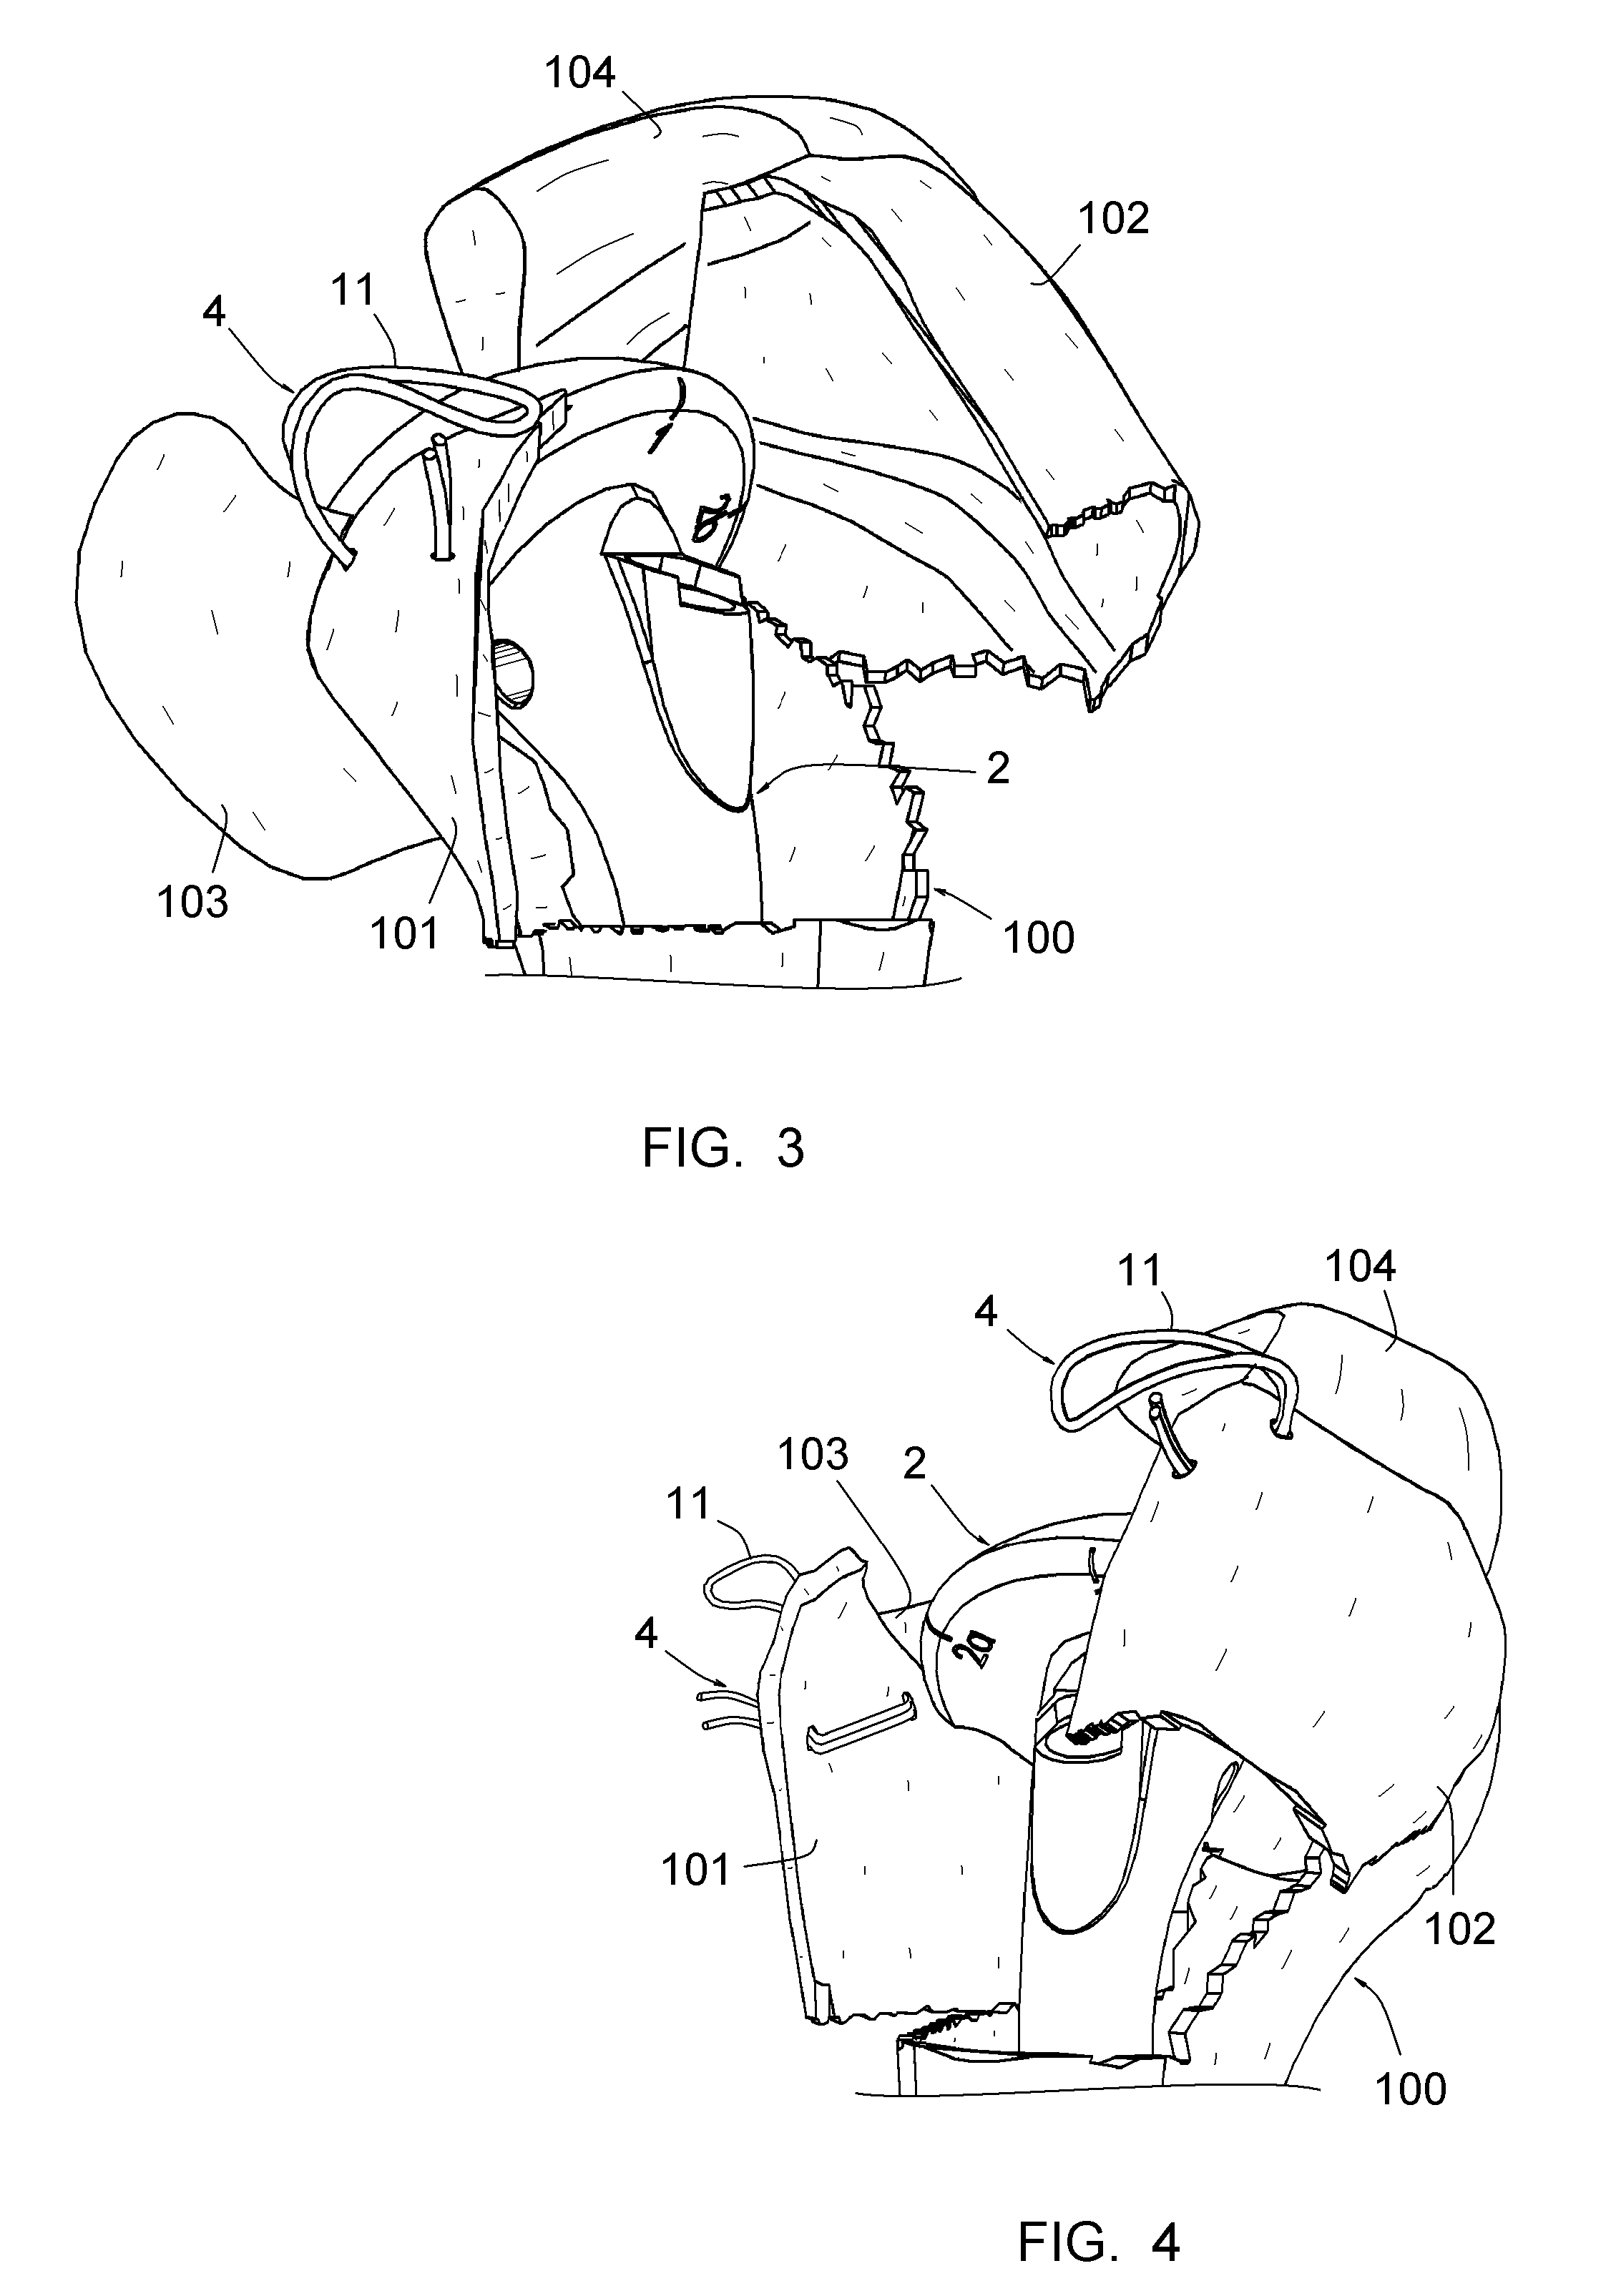 Surgical method for repairing a fractured shoulder joint